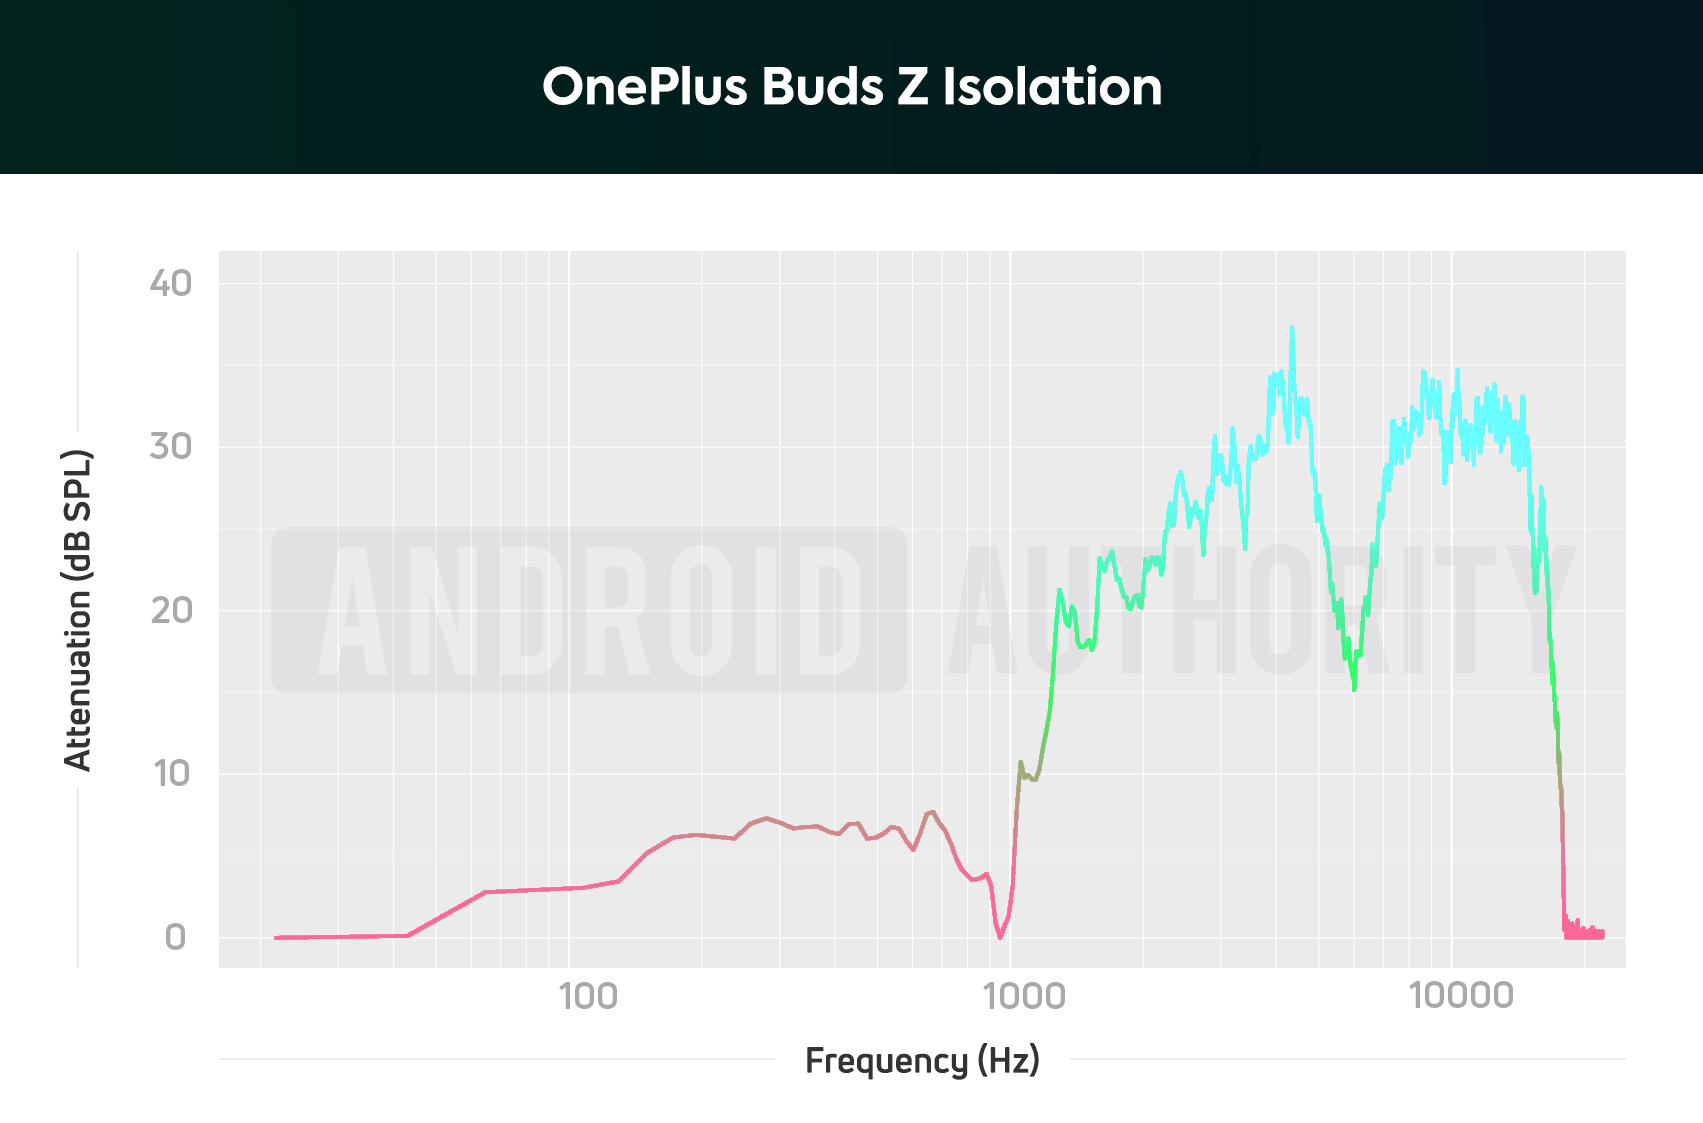 OnePlus Buds Z AA isolation chart